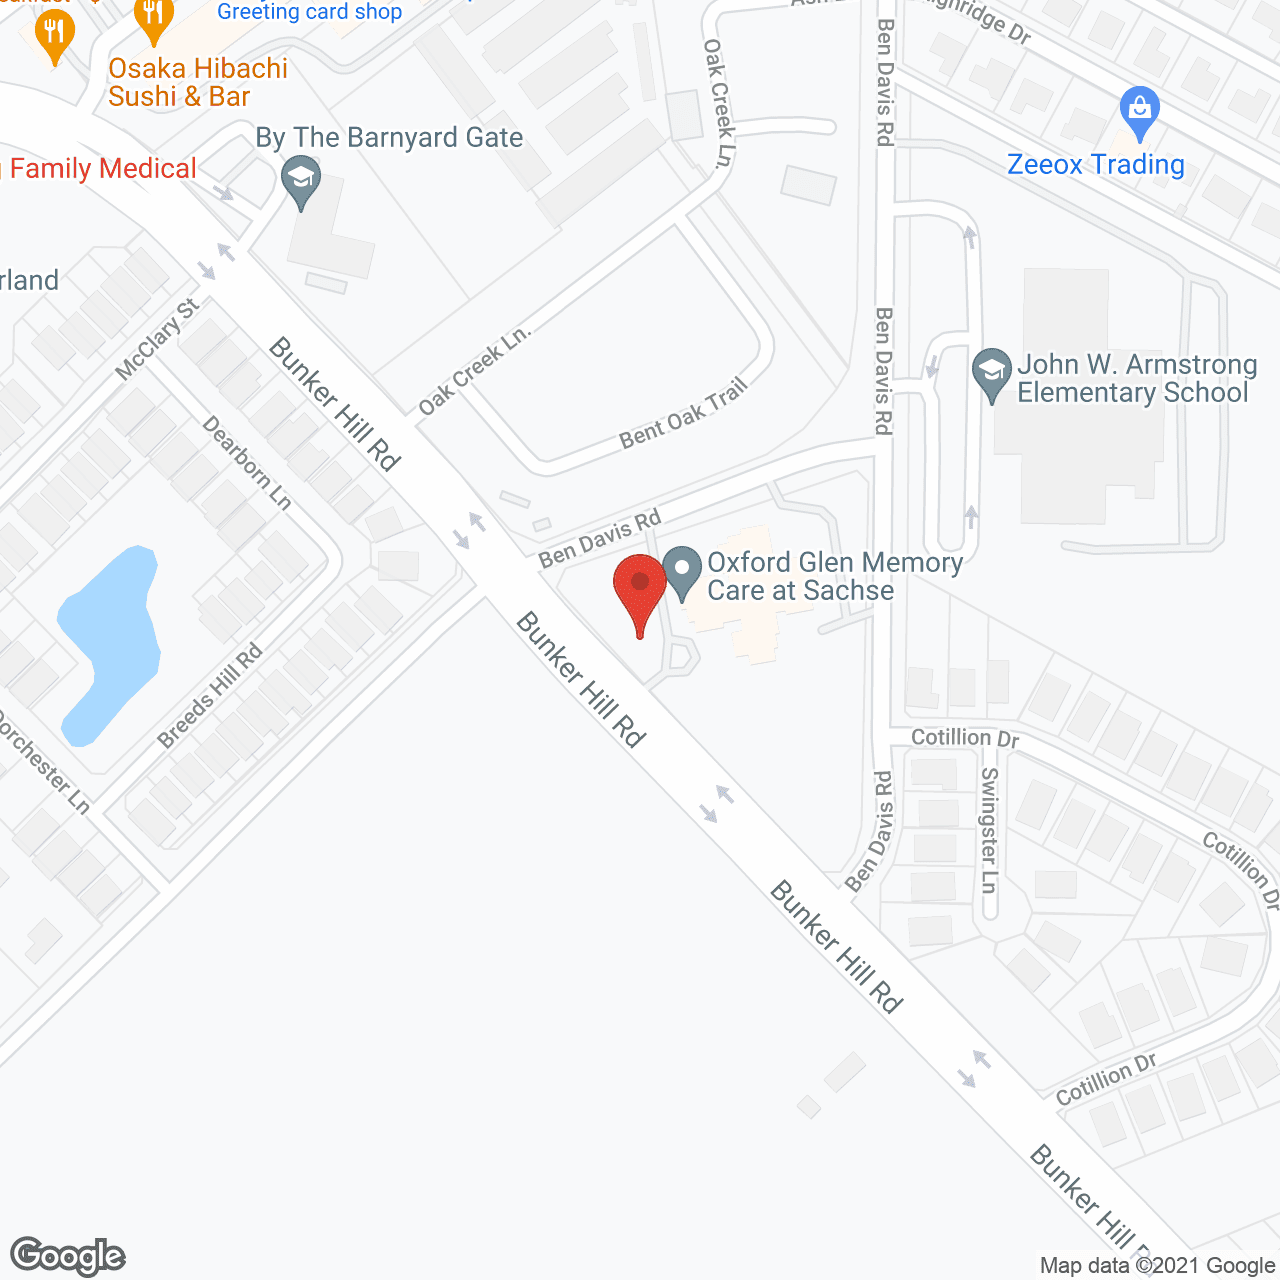 Oxford Glen Memory Care at Sachse in google map